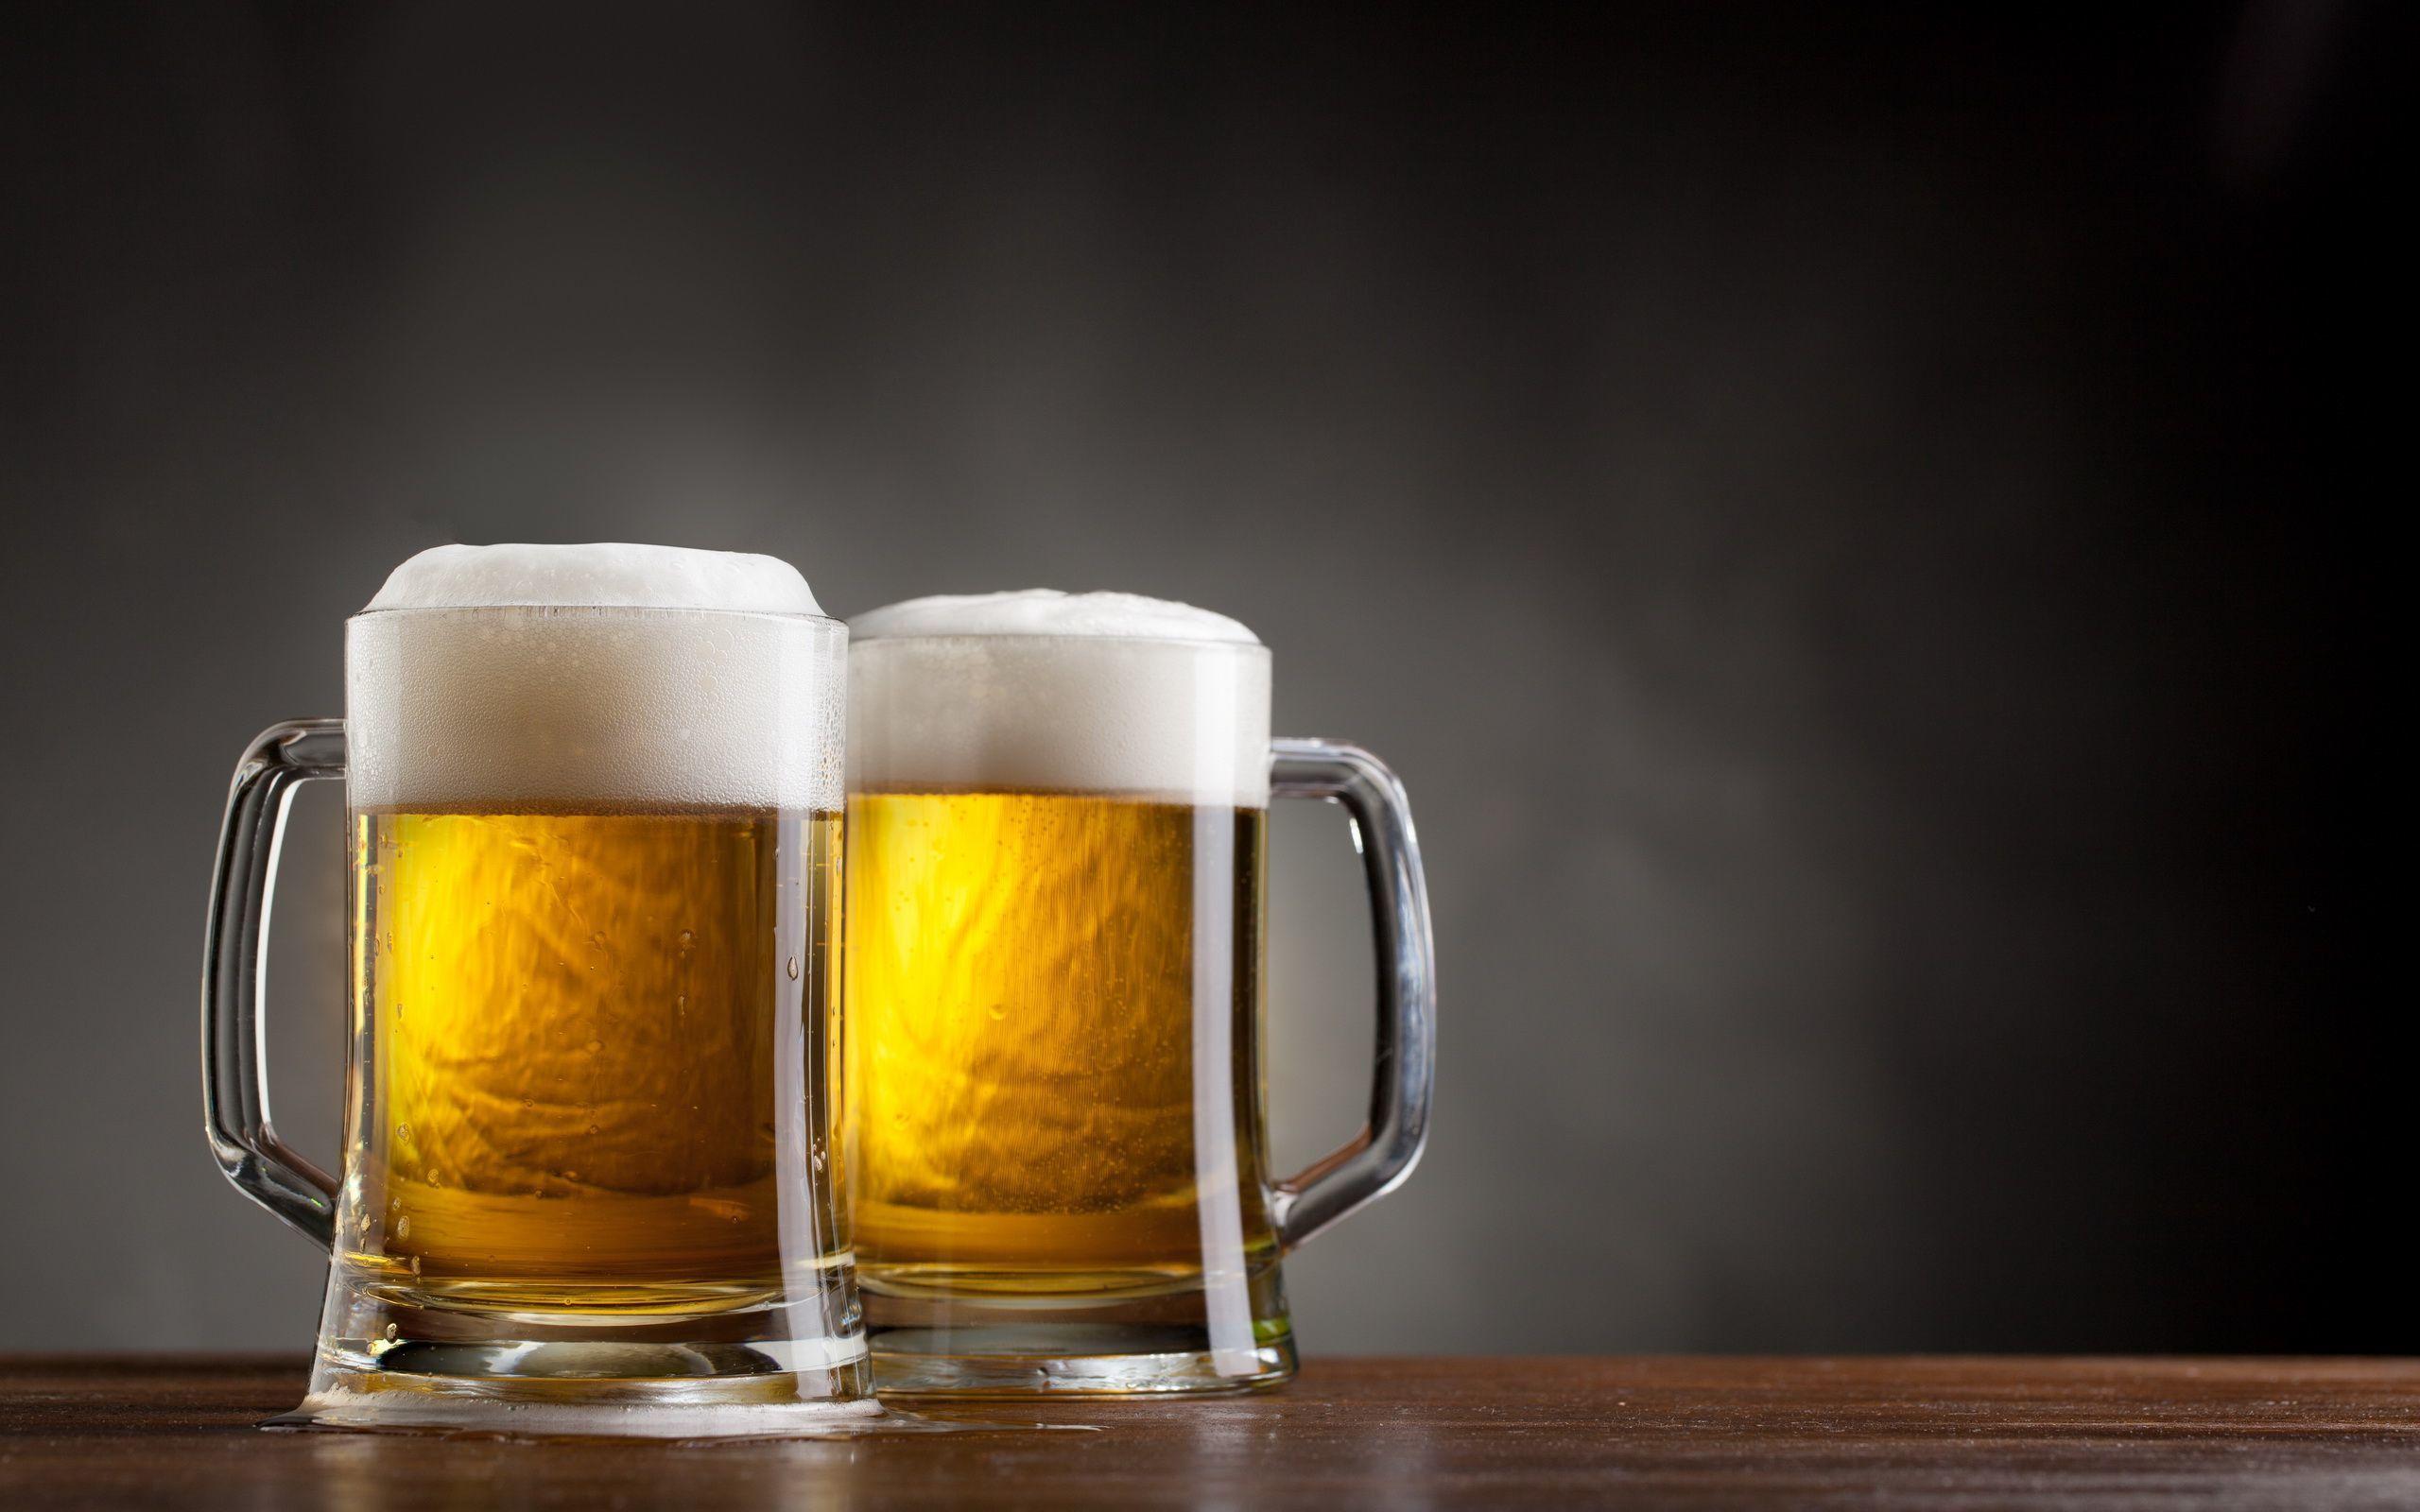 Beer Photography: Capturing the Essence of Beer